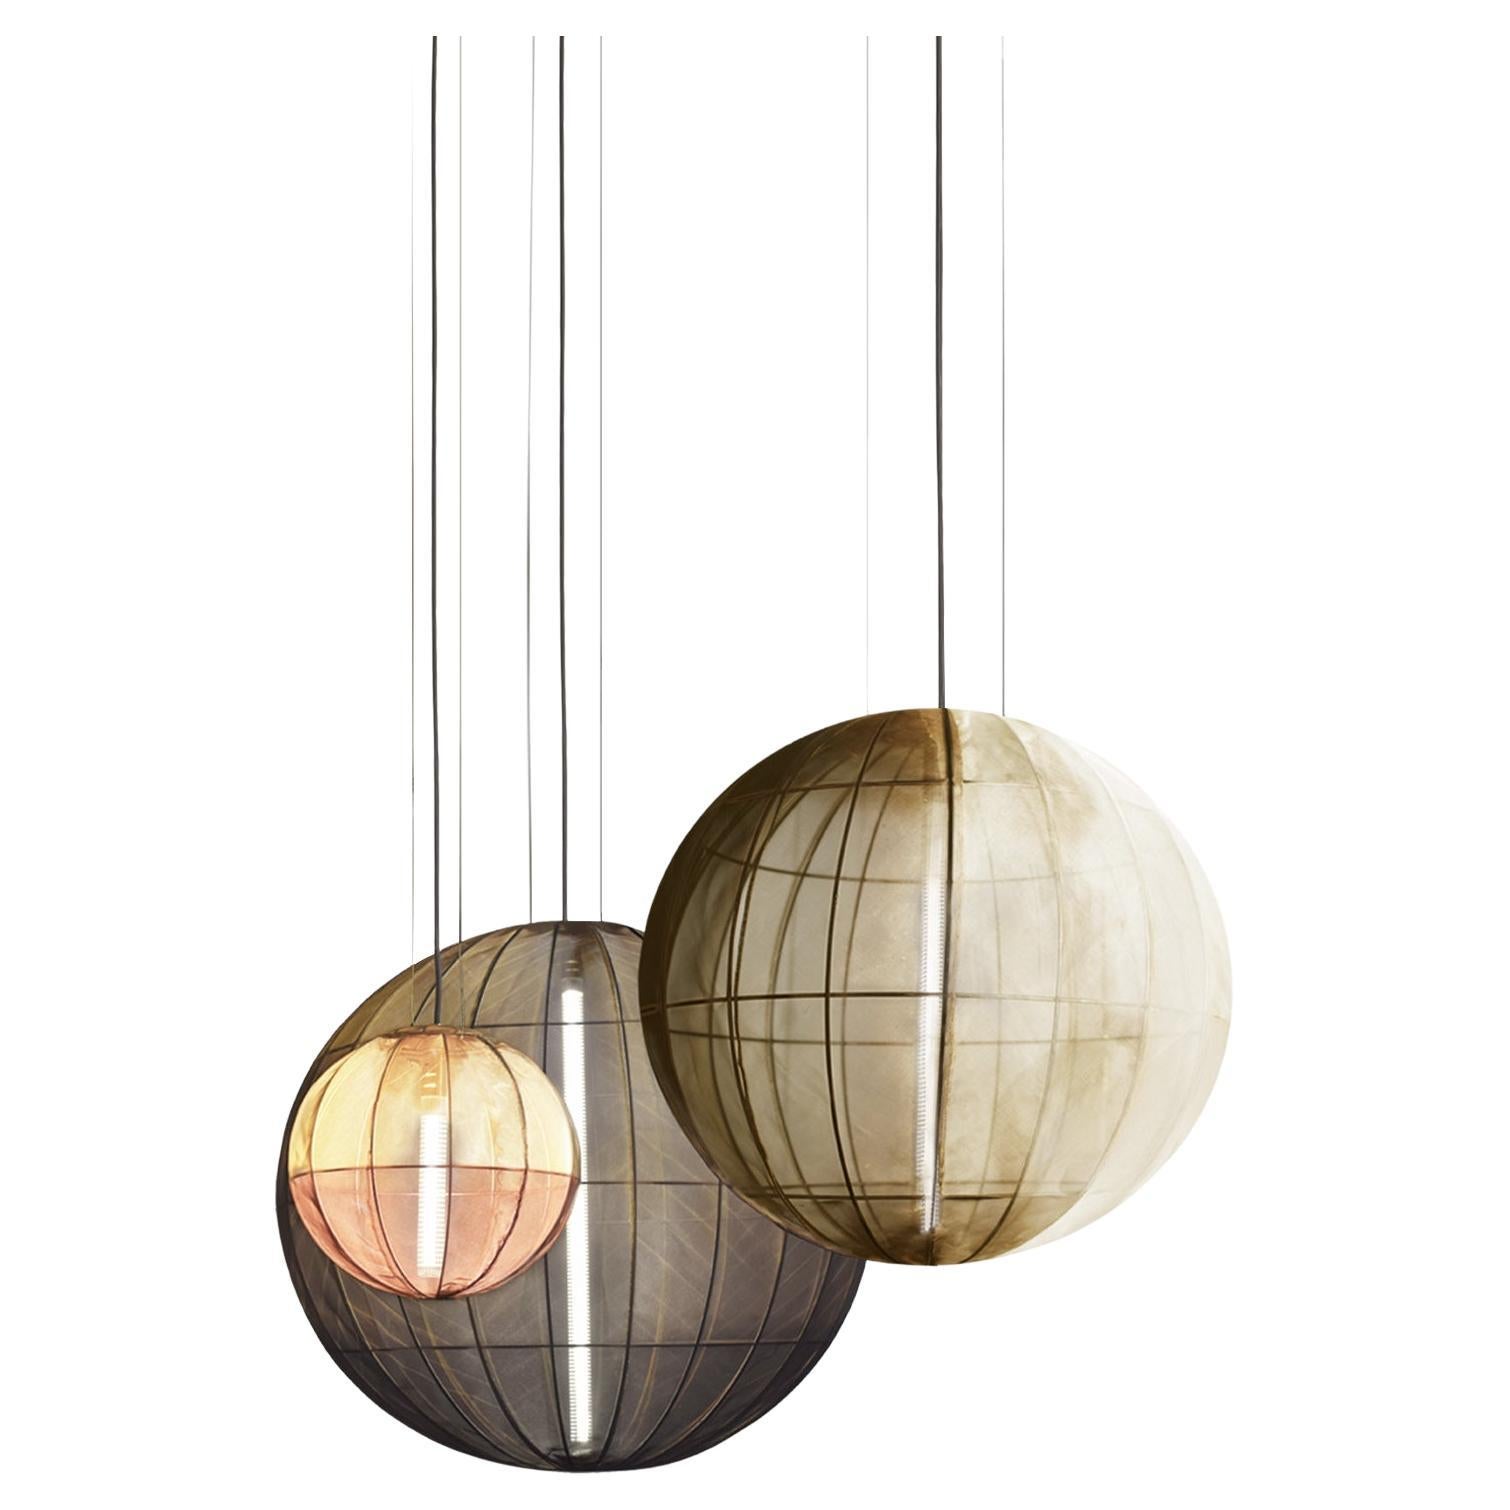 Oxygen Spheres, Ceiling Installation by Different Lamps by Angela Ardisson